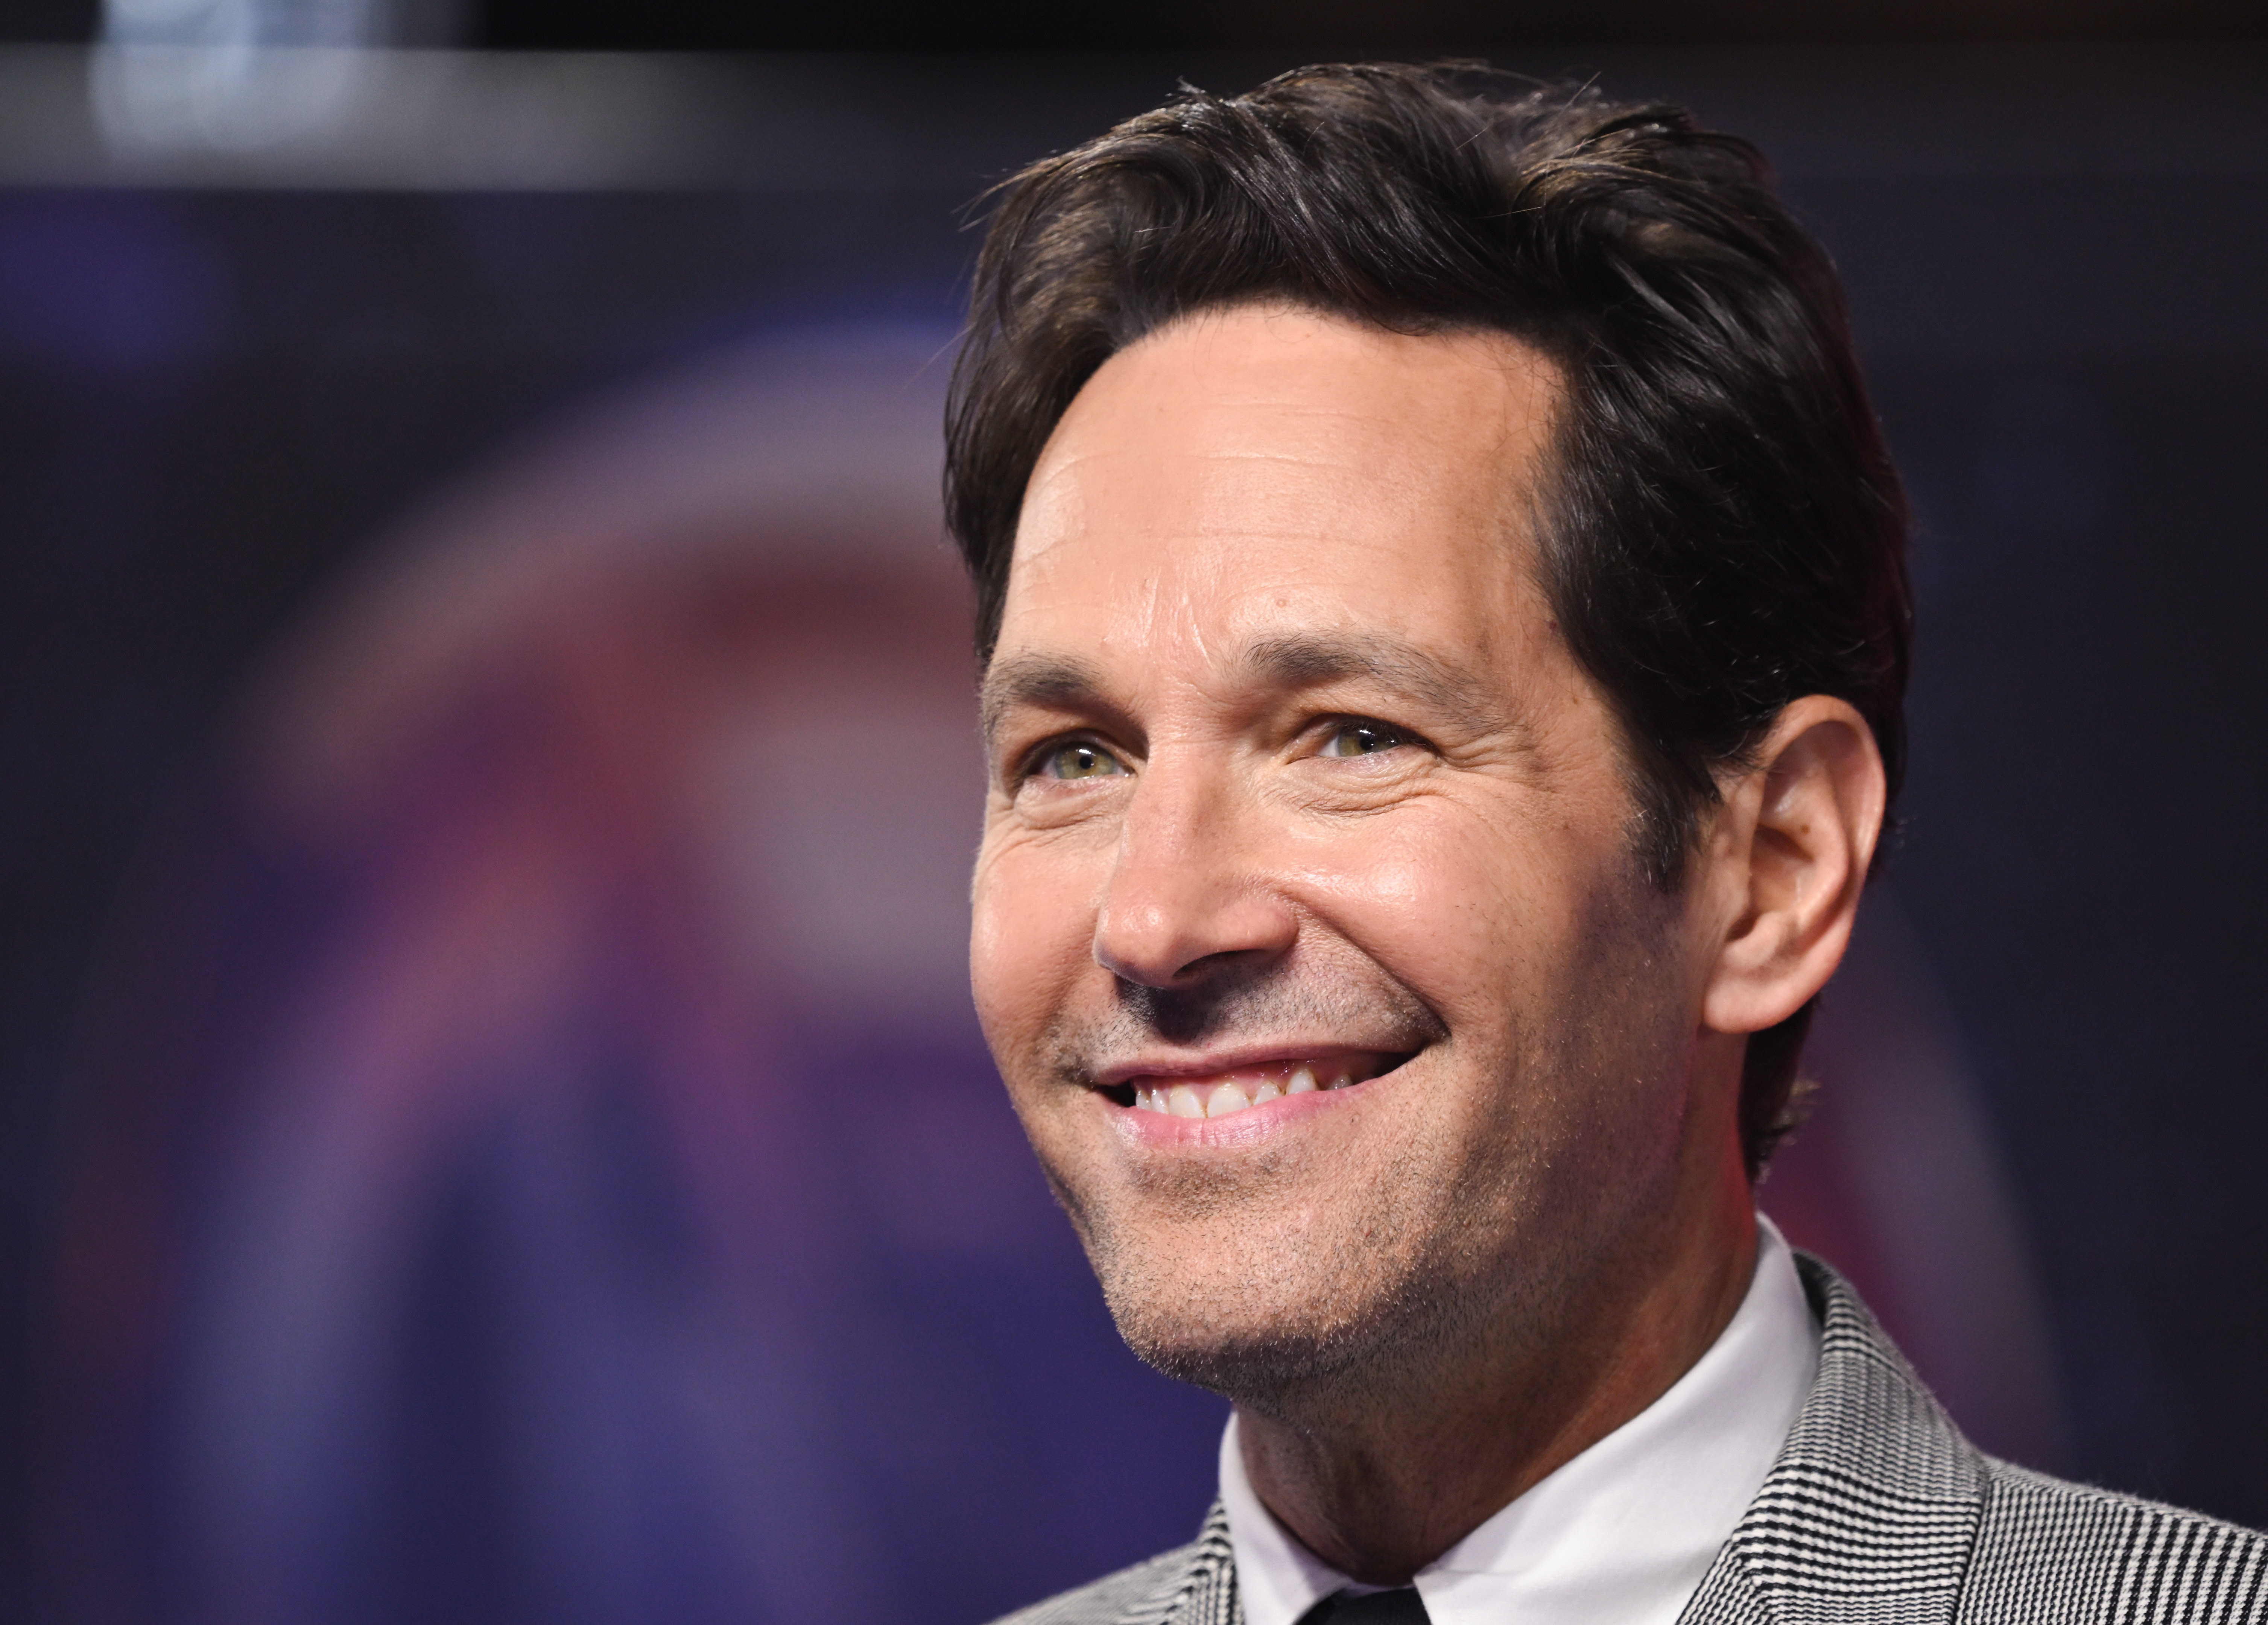 Paul Rudd Explains Why He Shouldn’t Have Been In The “Friends” Finale